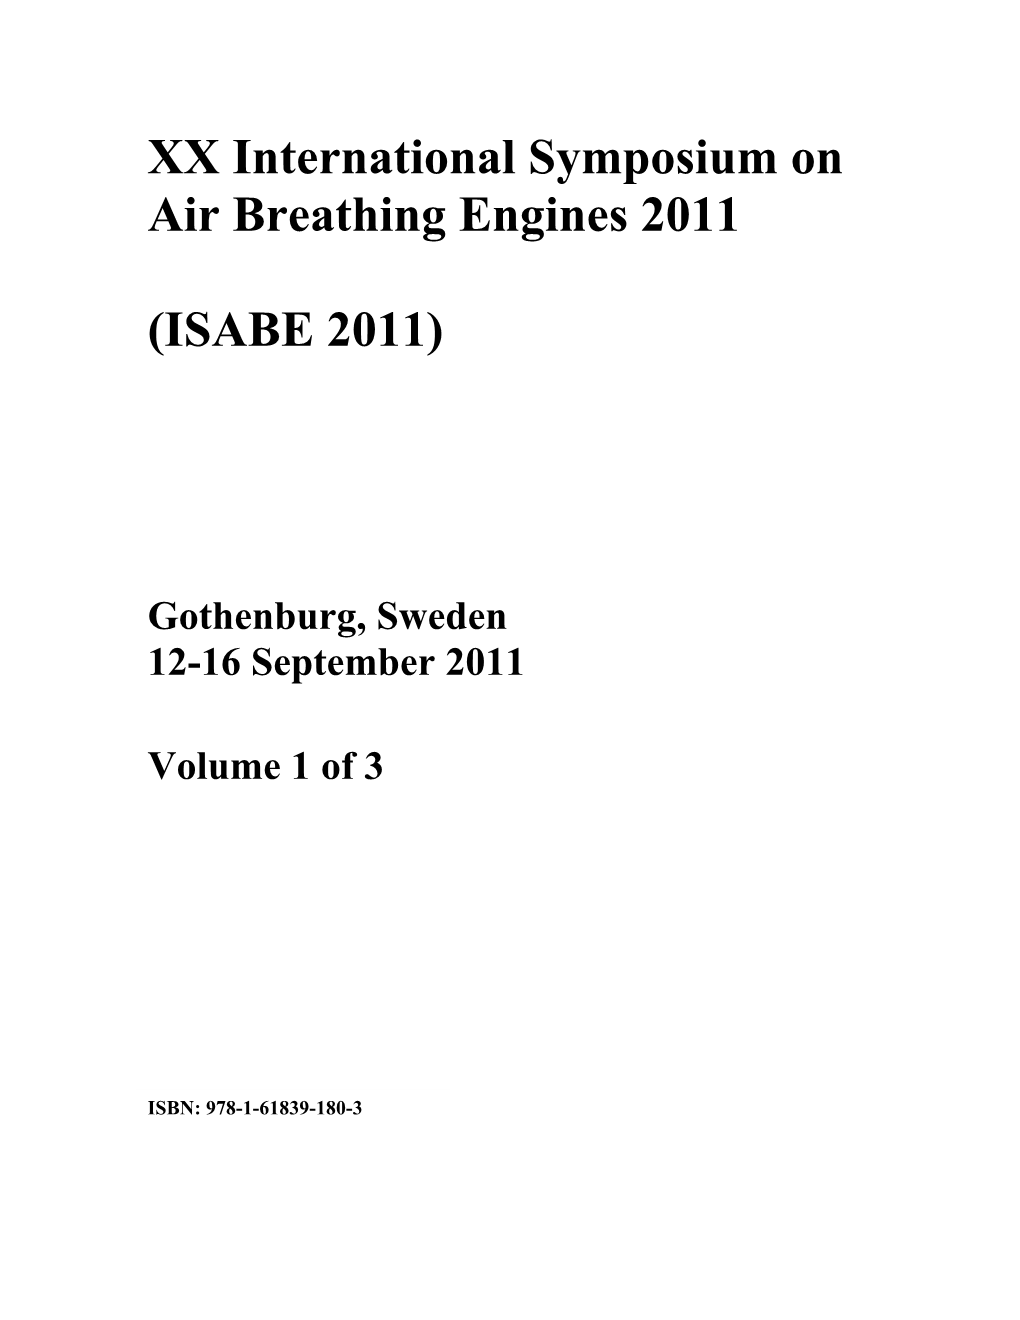 Numerical Simulations of Unsteady, Multi-Phase Flows in Aero-Engine Like Combustors